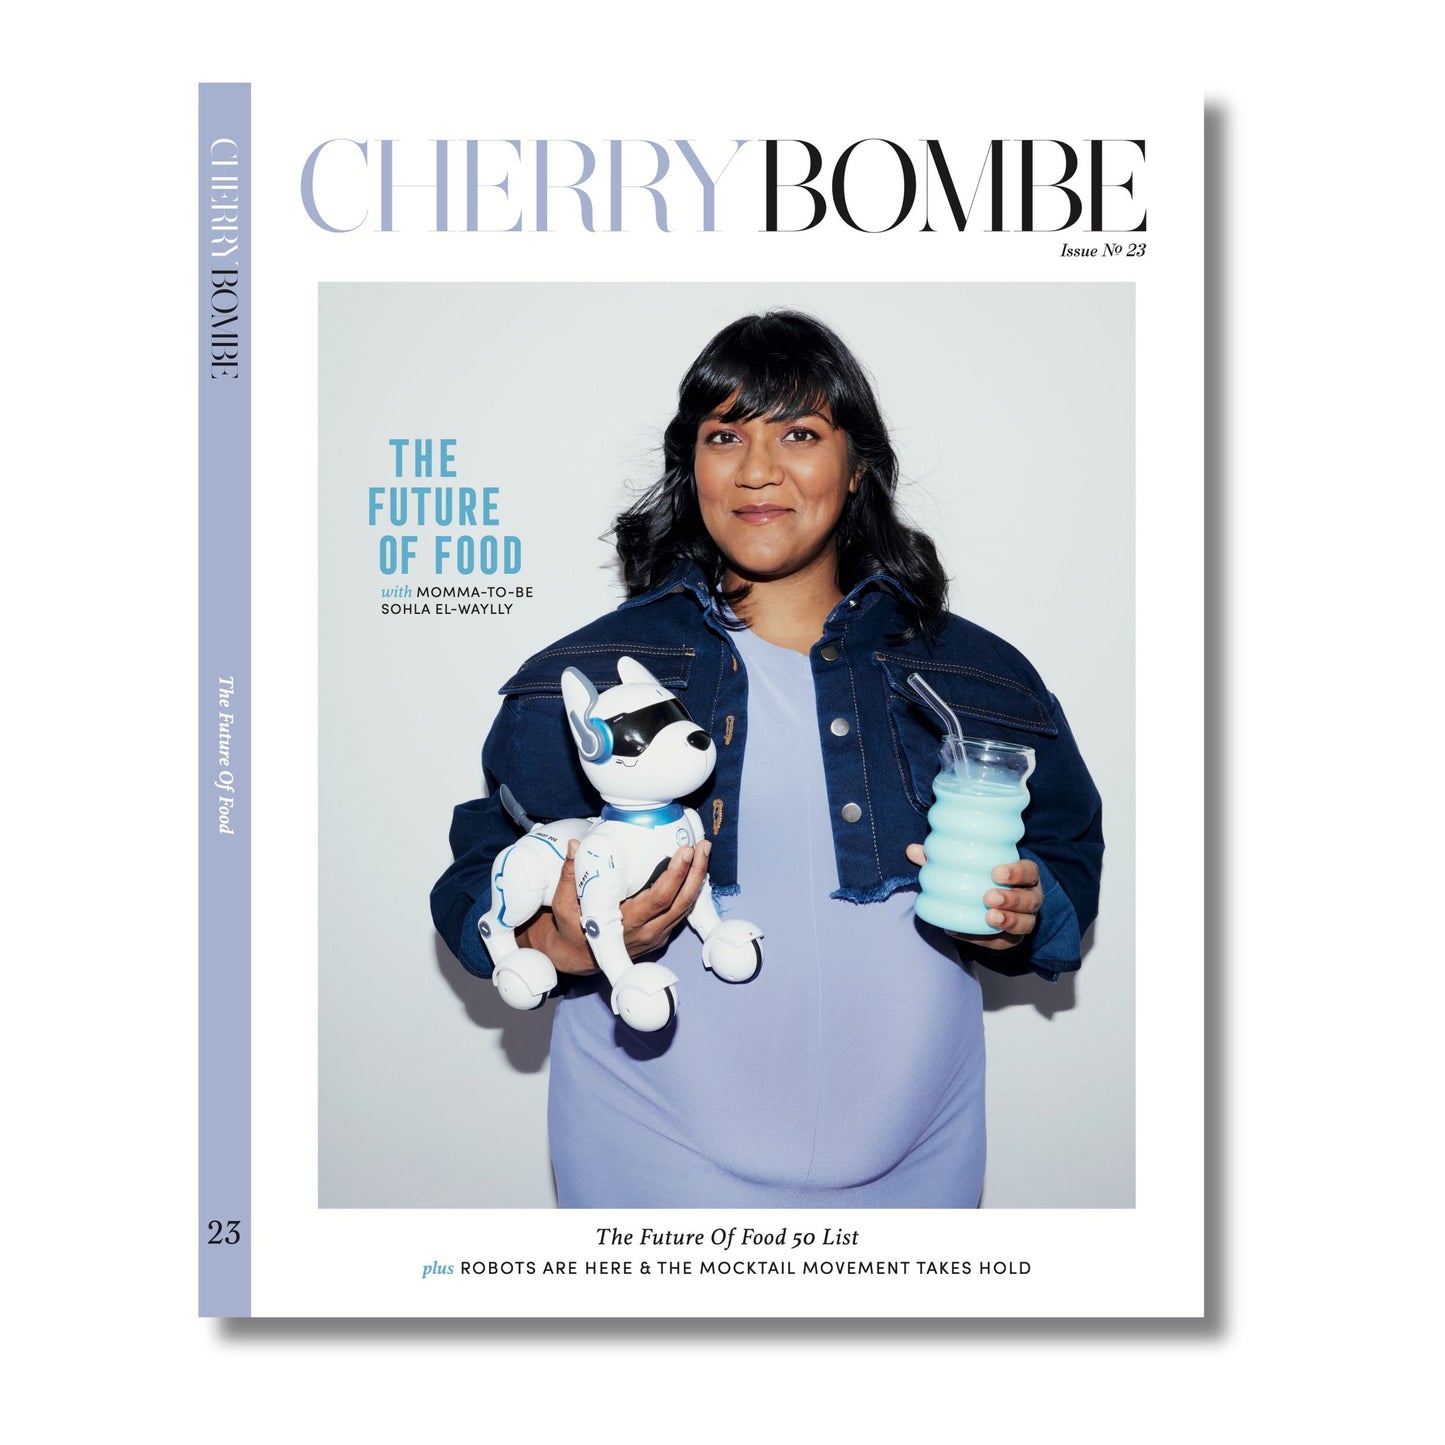 Cherry Bombe - Issue Nº 22: The Future of Food is You